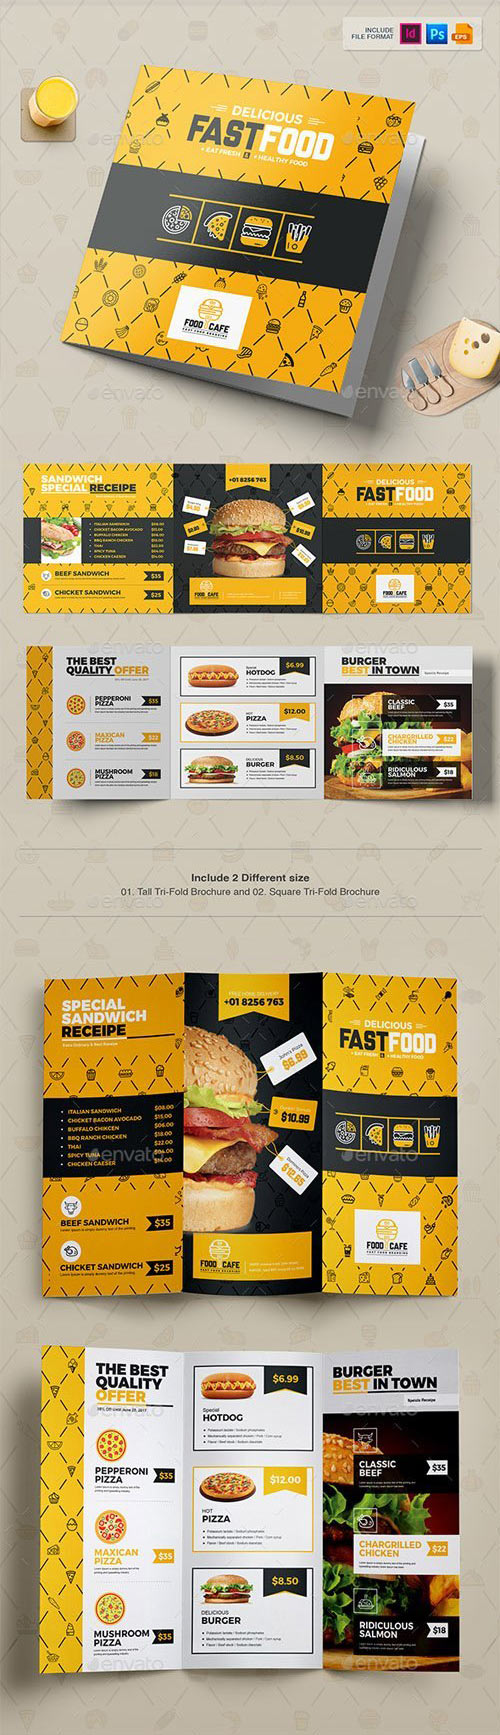 Tri-Fold Brochure Square & Tall Design Template for Fast Food Restaurants Cafe